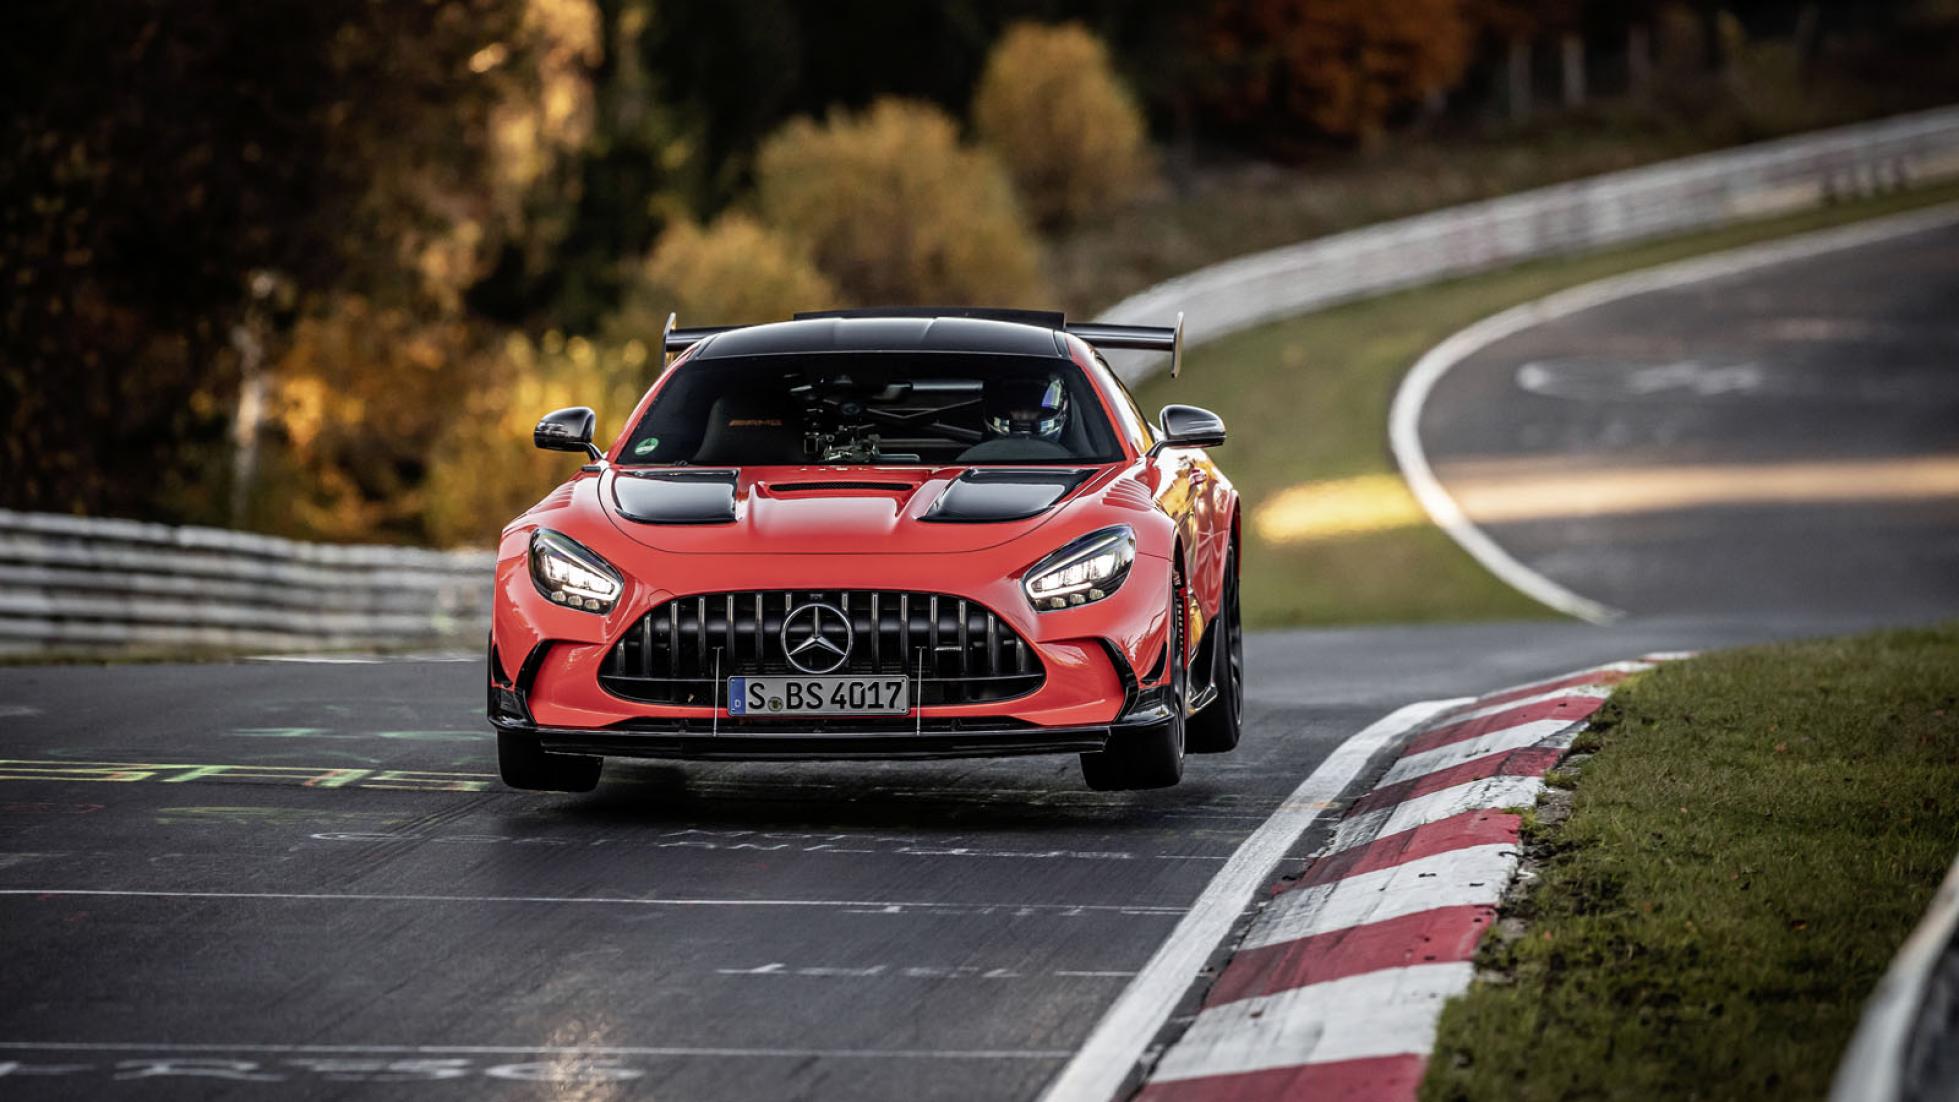 The AMG GT Black Series is the fastest production car at the 'Ring